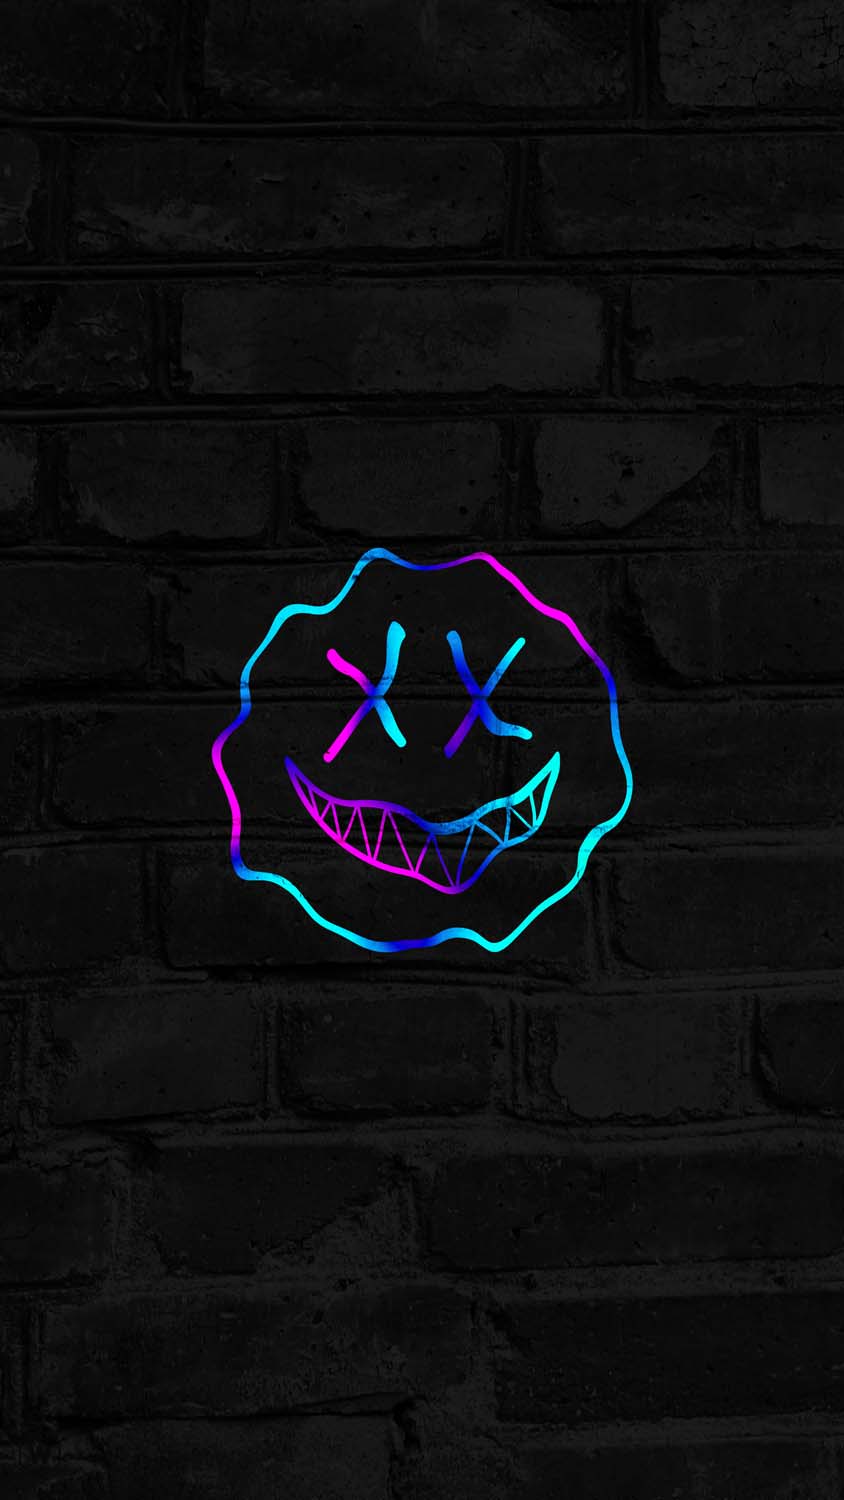 Wicked Smile iPhone Wallpaper HD